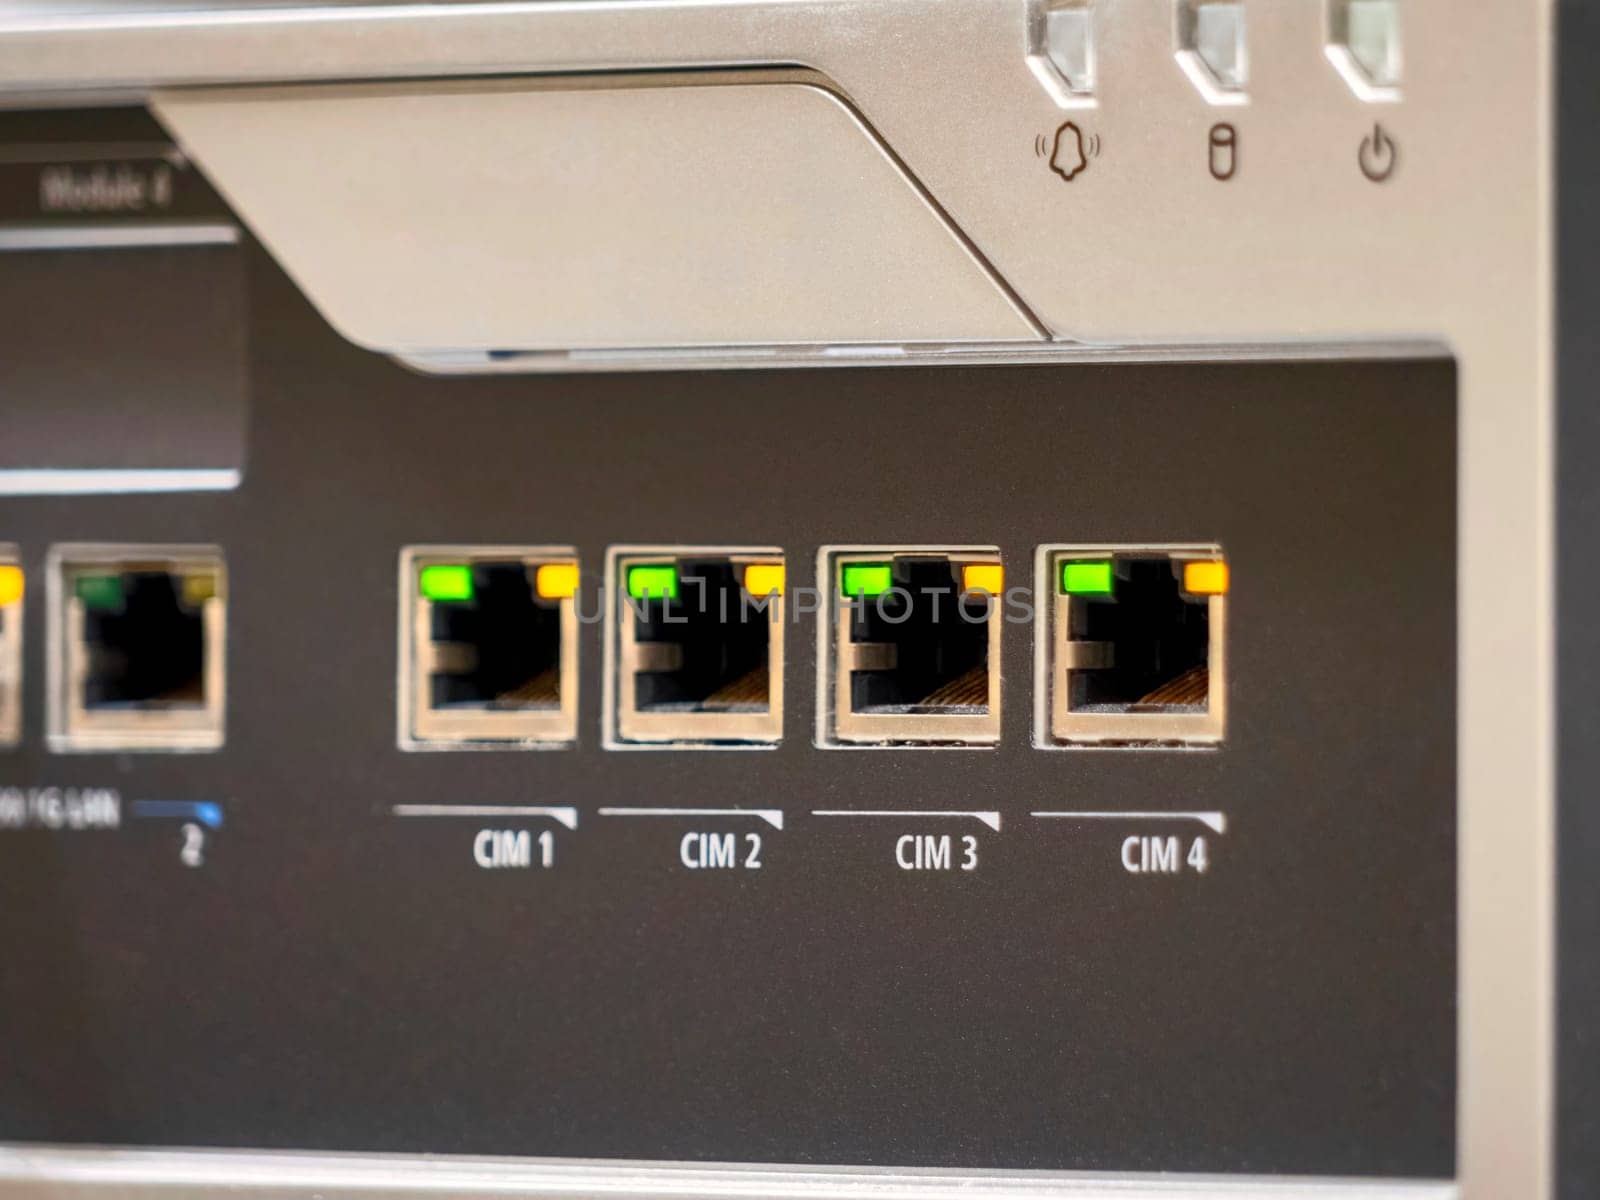 Ethernet ports of communication equipment in a test mode with lights turned on